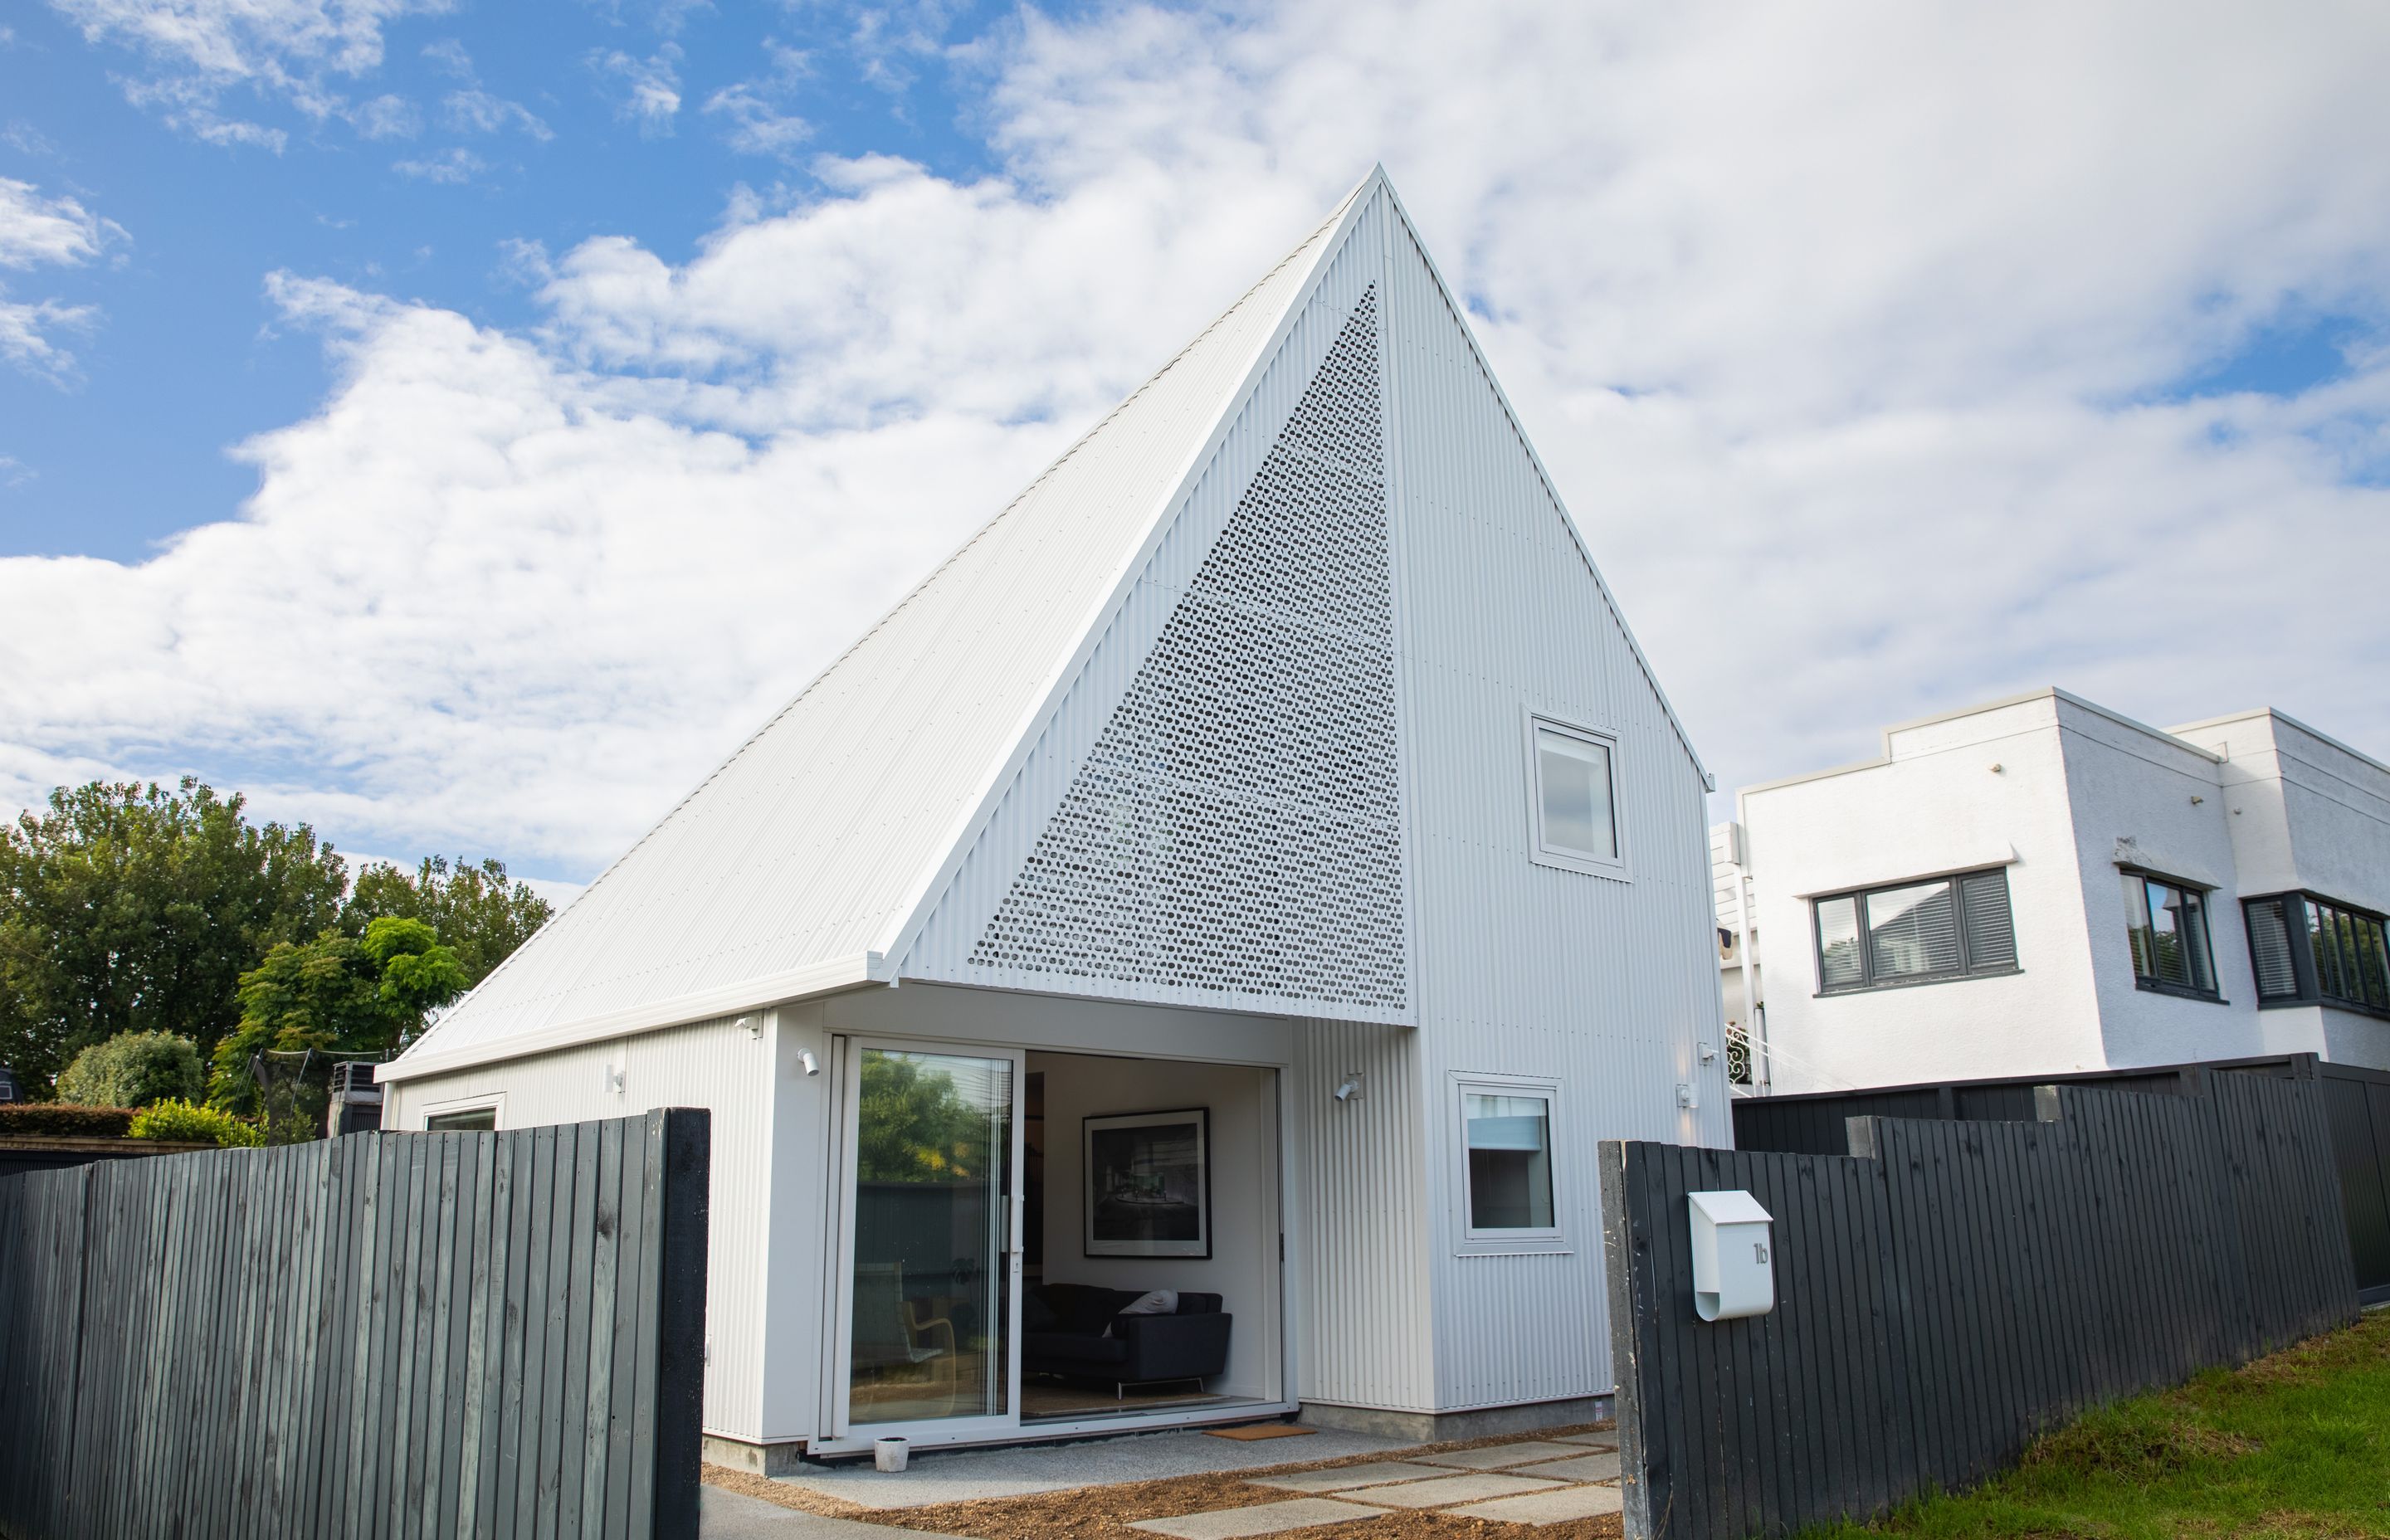 The Paper House was created to resemble folded paper and makes the most of a very compact site.